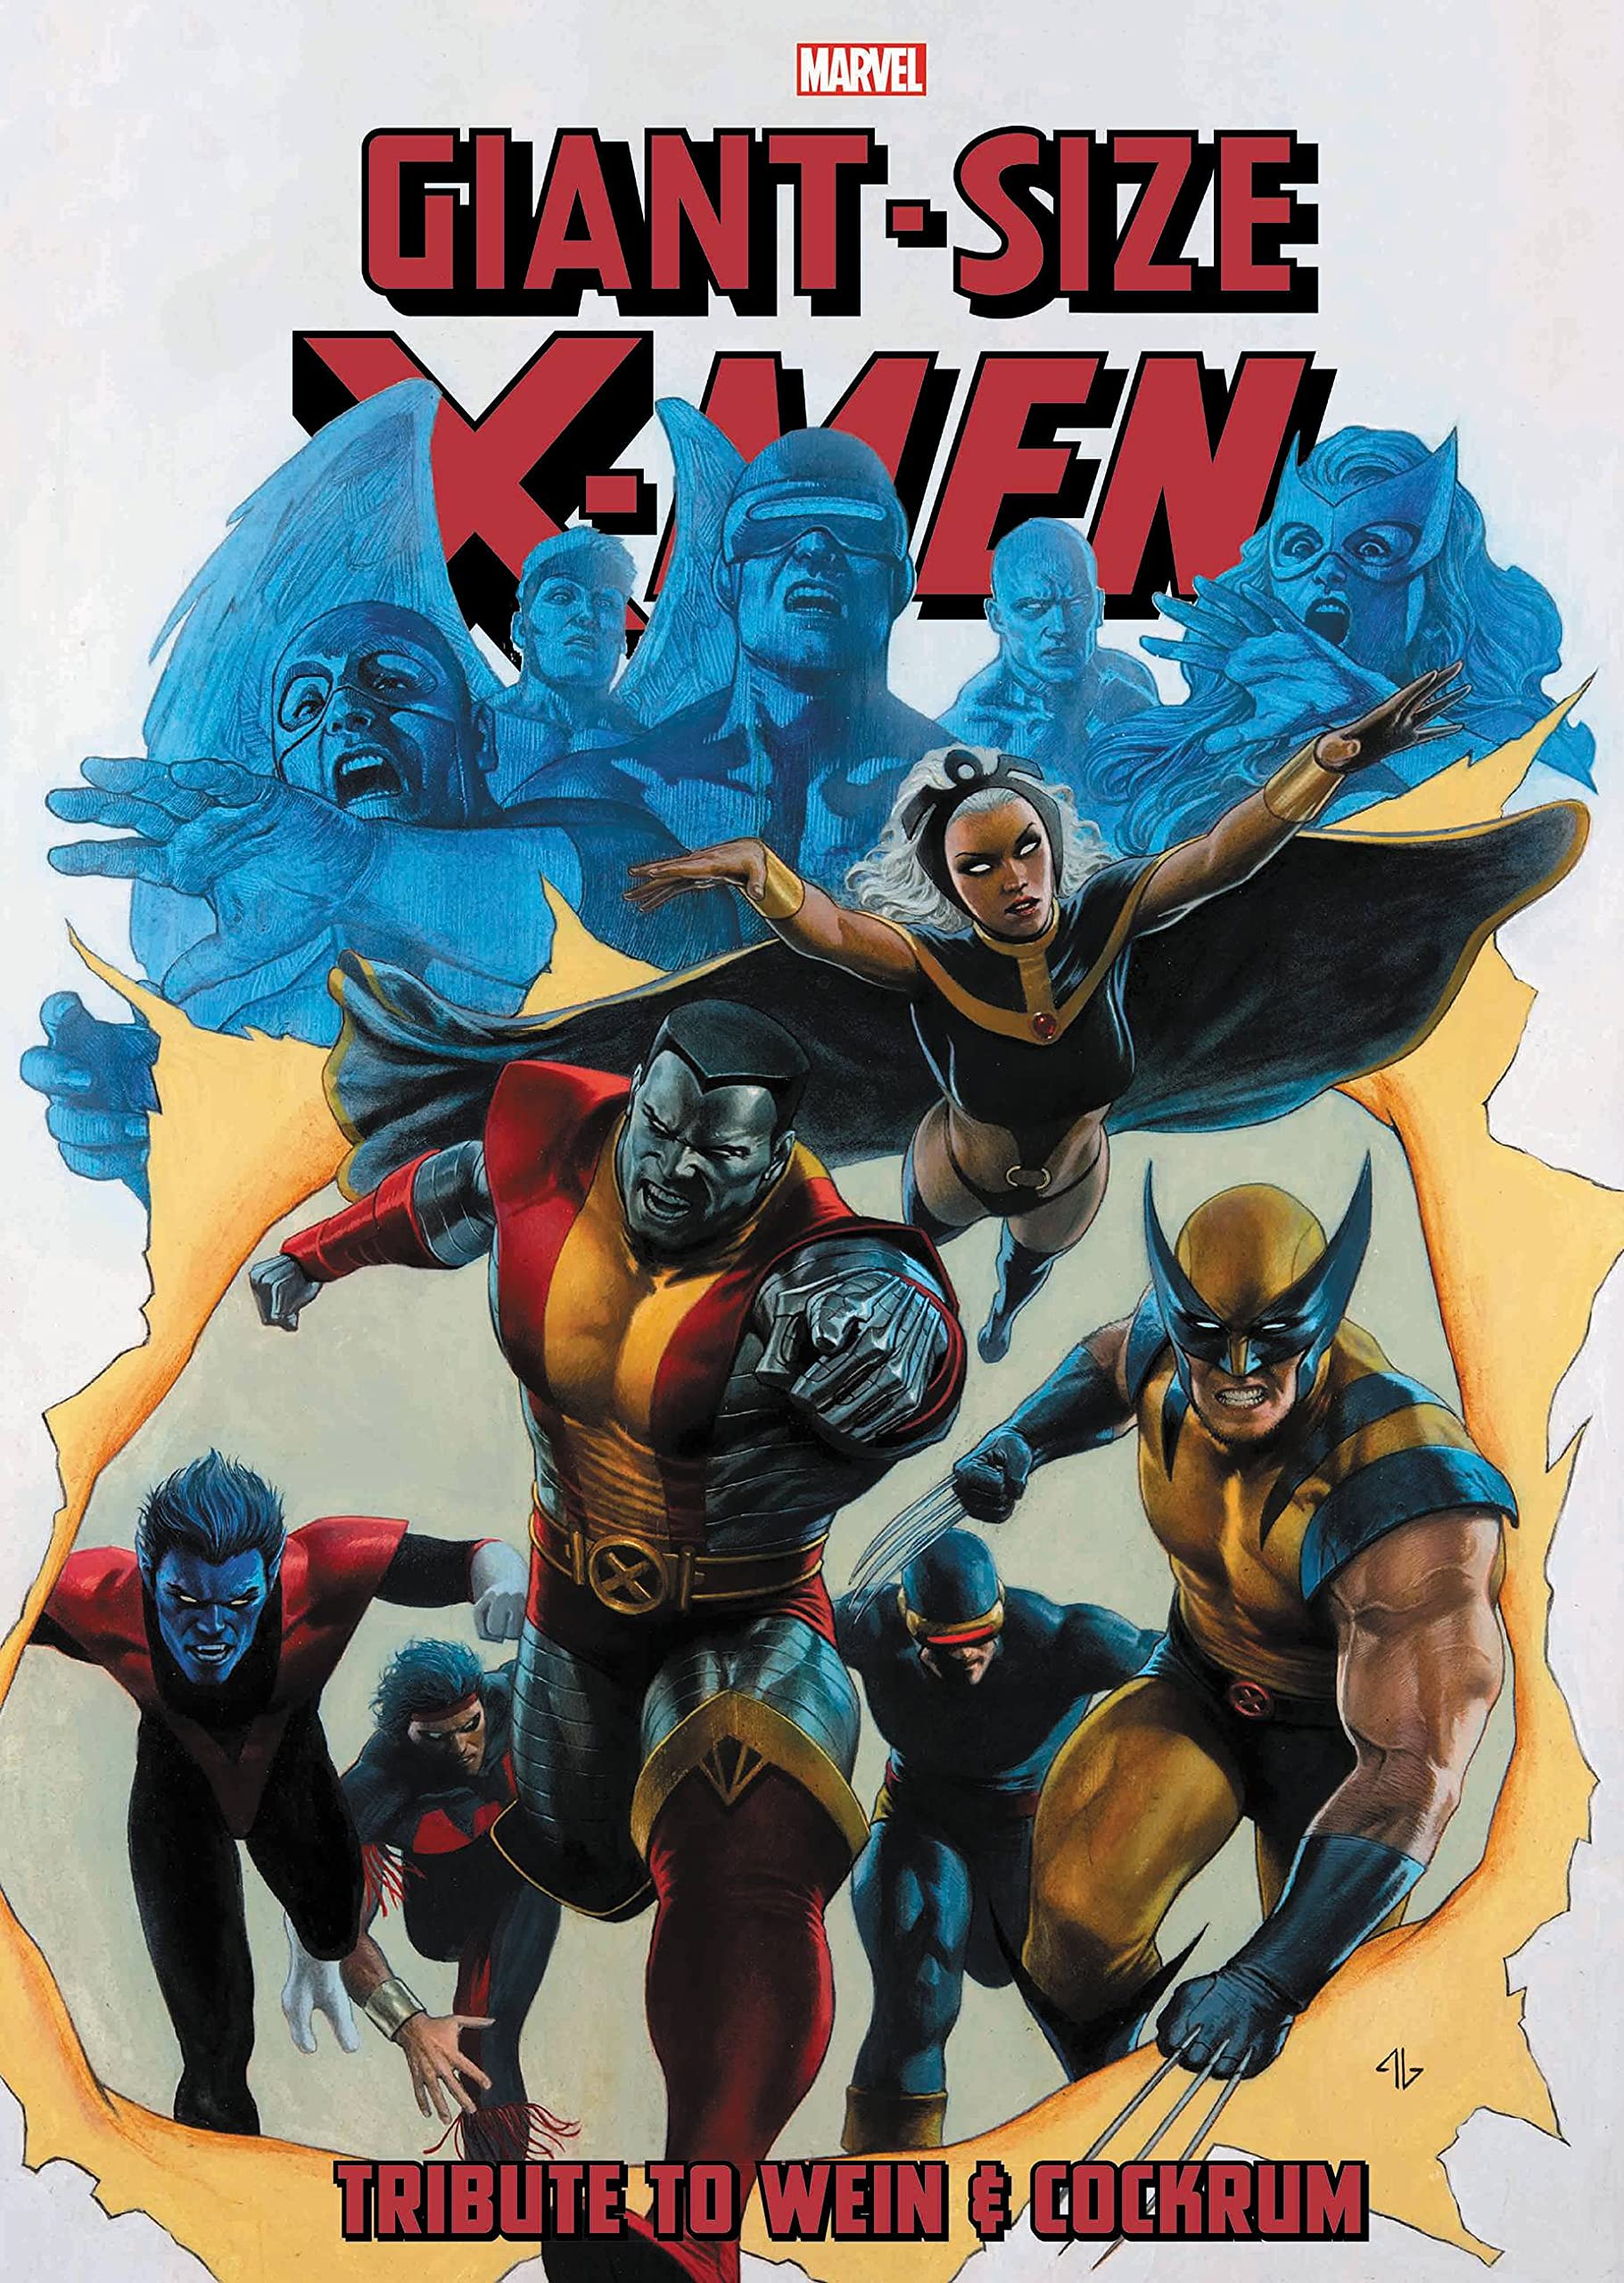 Giant-size X-men: Tribute To Wein And Cockrum